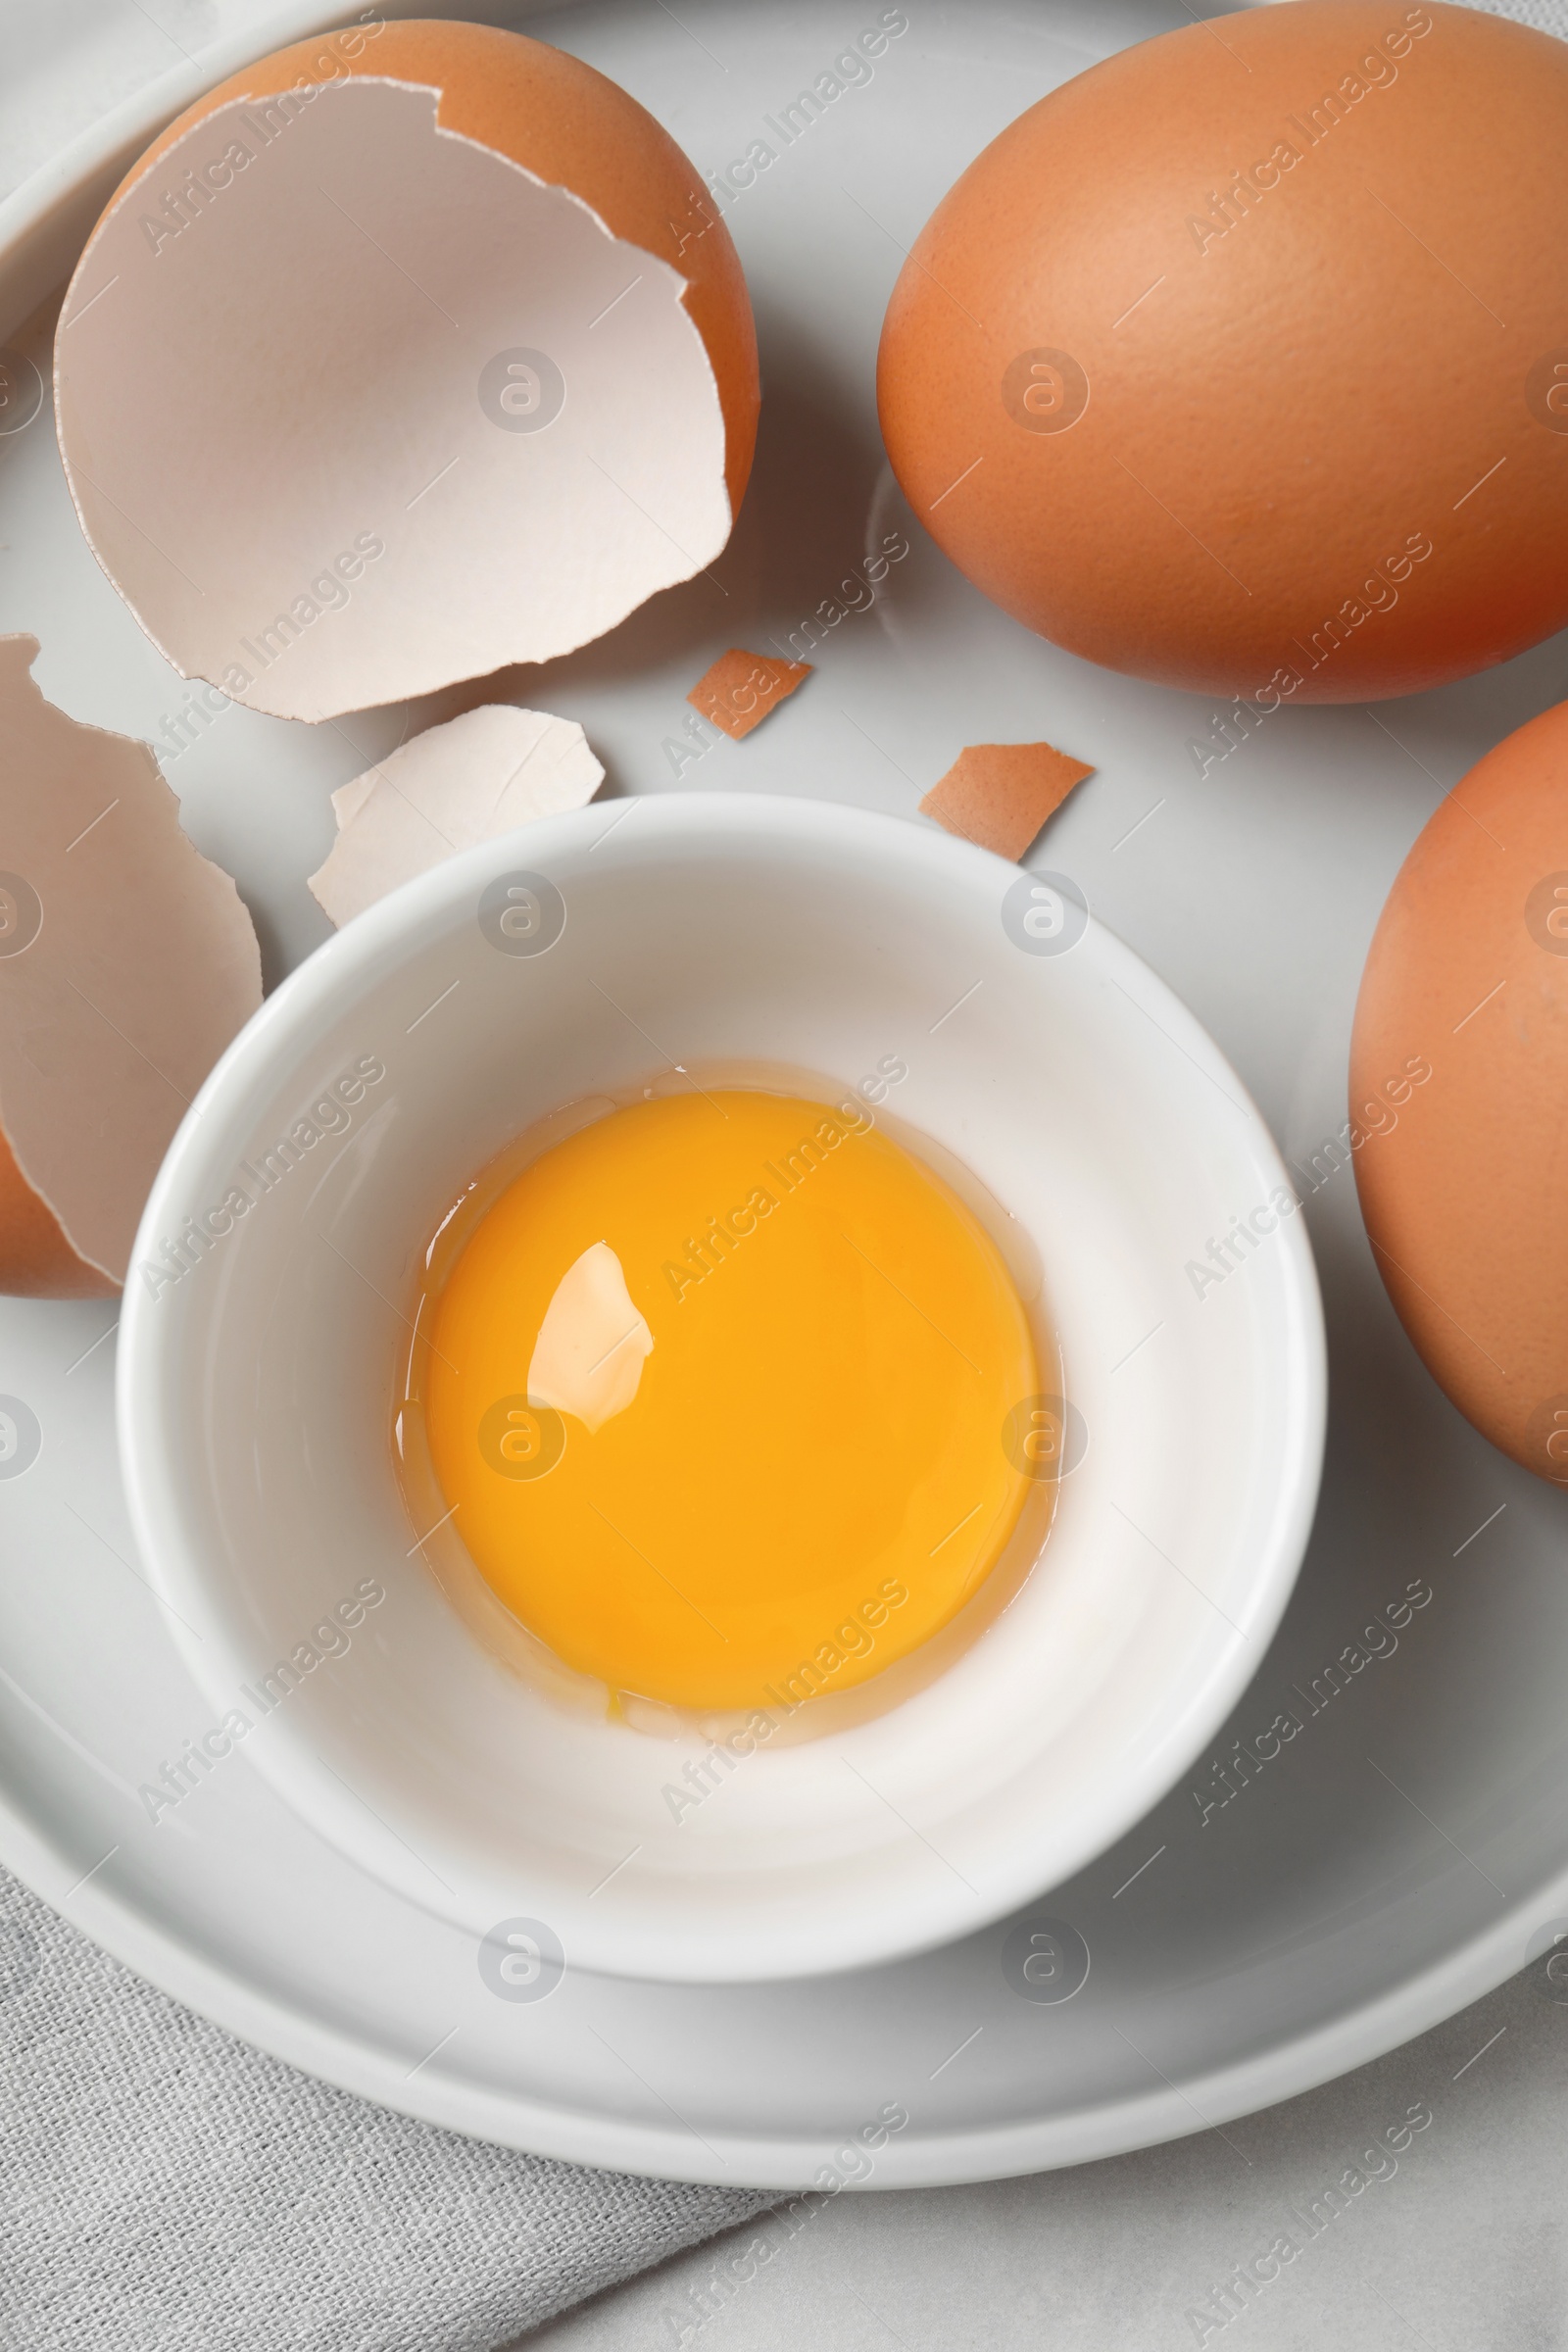 Photo of Chicken eggs and bowl with raw yolk on table, top view